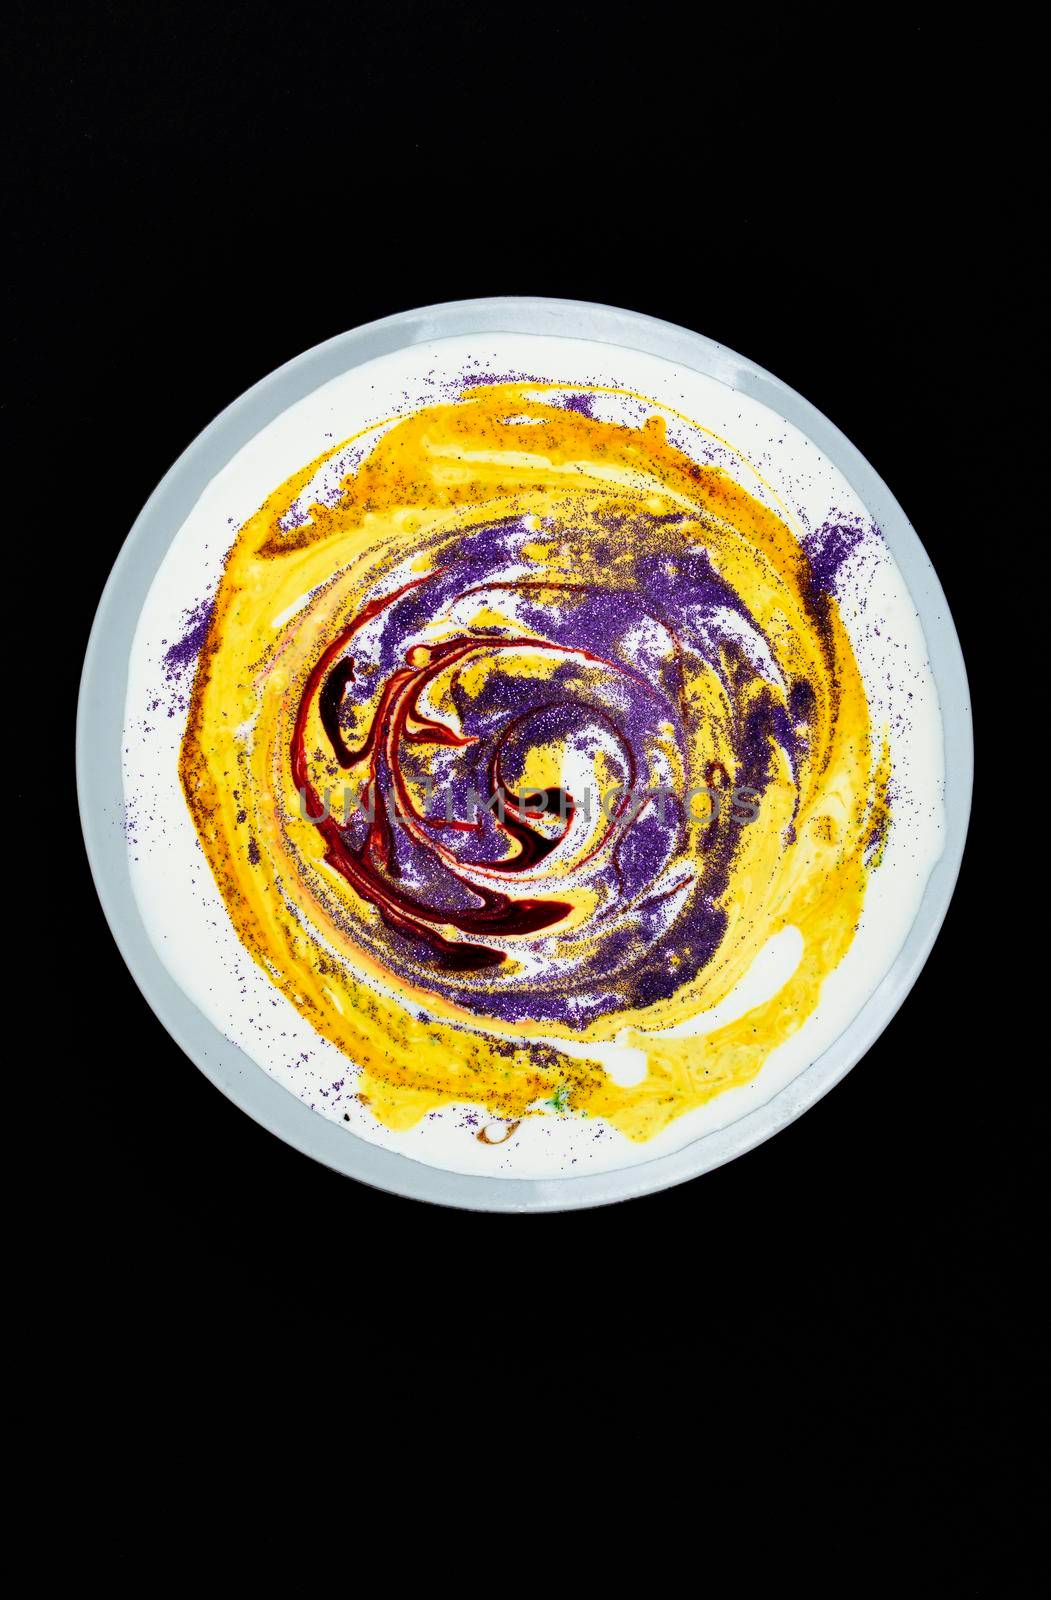 A plate with yellow paint and circular stains on a dark background.Abstract art. Search for material for art work.